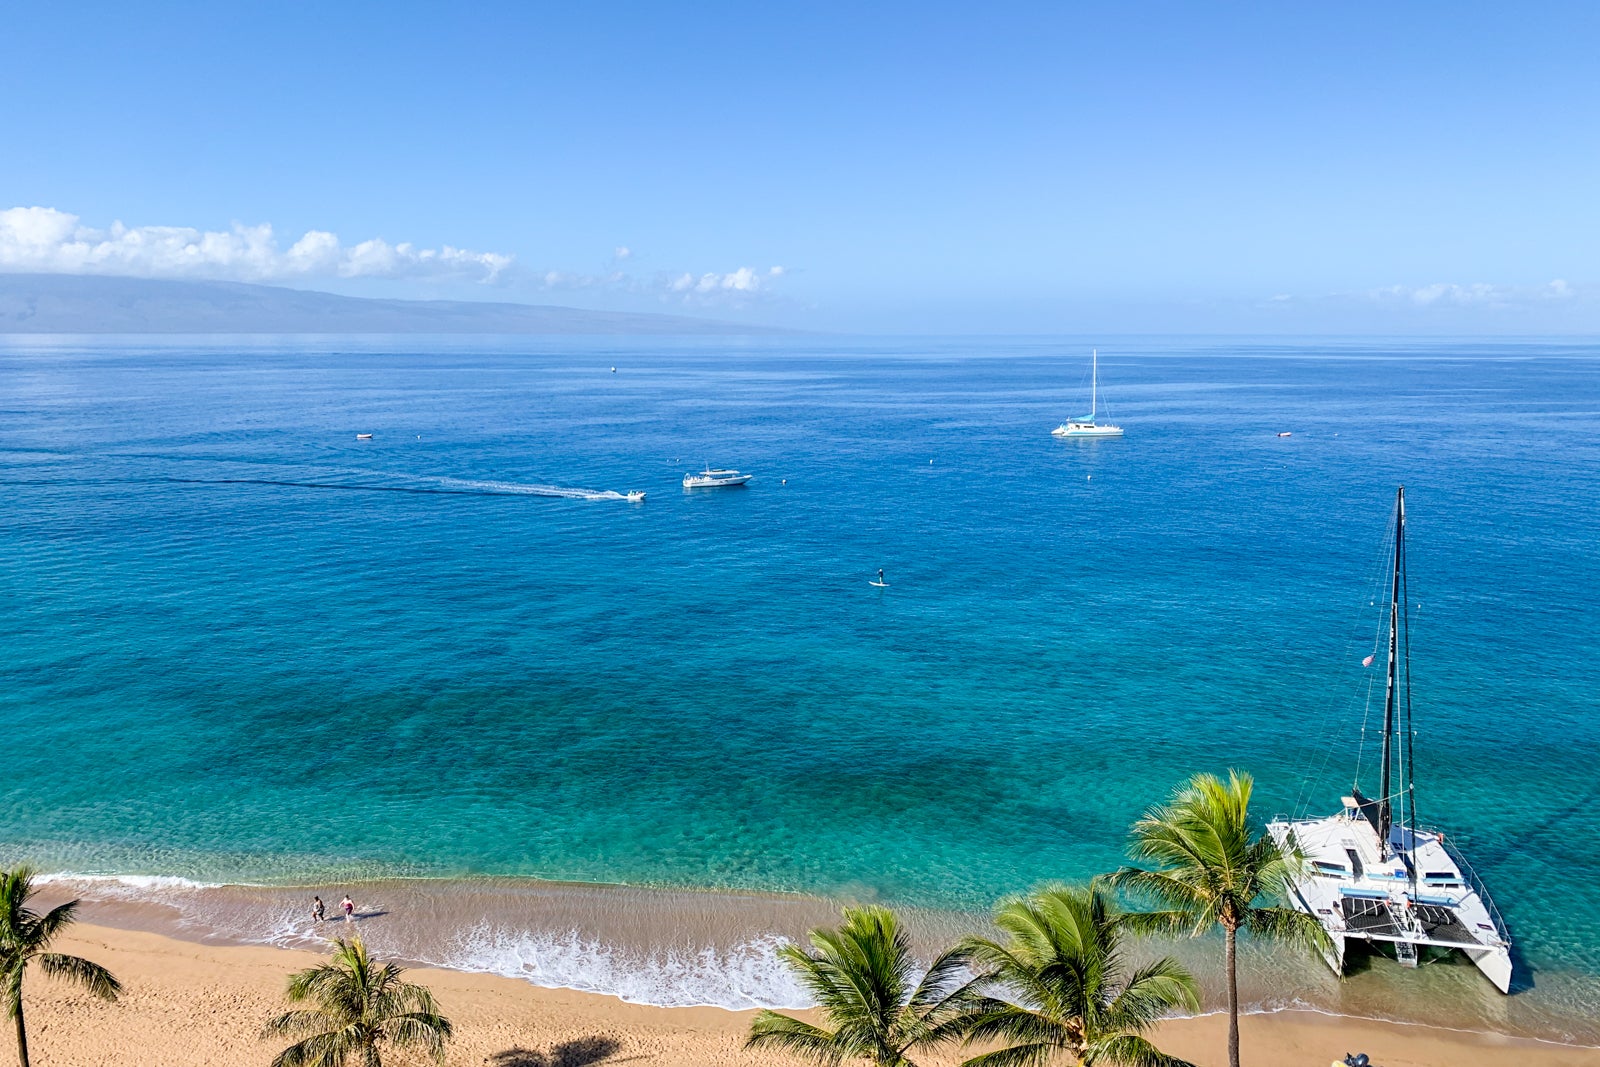 Beach and waterfront in Maui, Hawaii